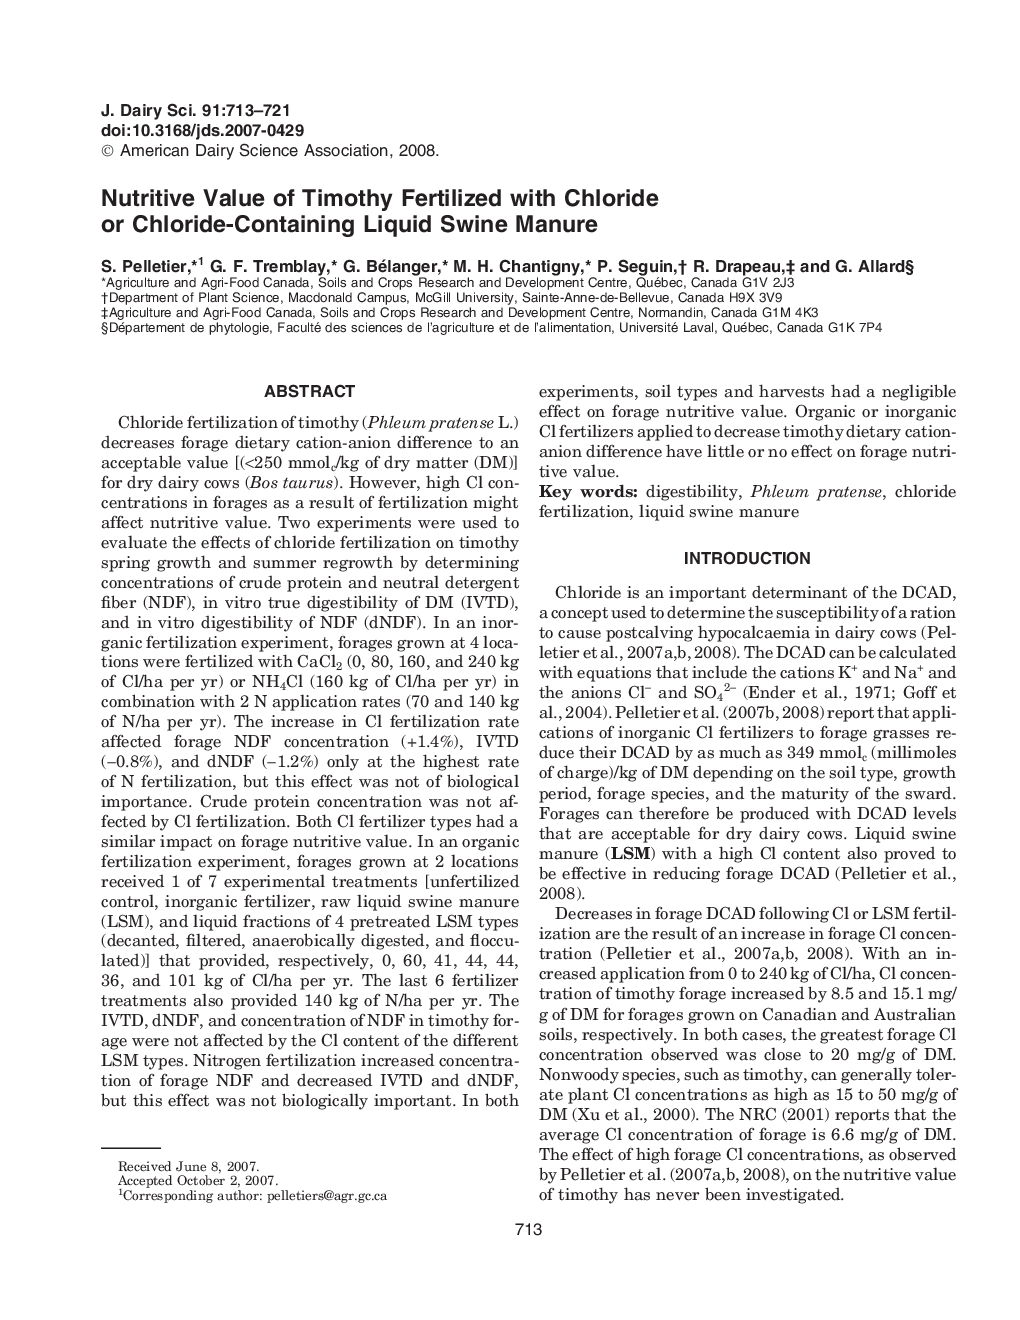 Nutritive Value of Timothy Fertilized with Chloride or Chloride-Containing Liquid Swine Manure